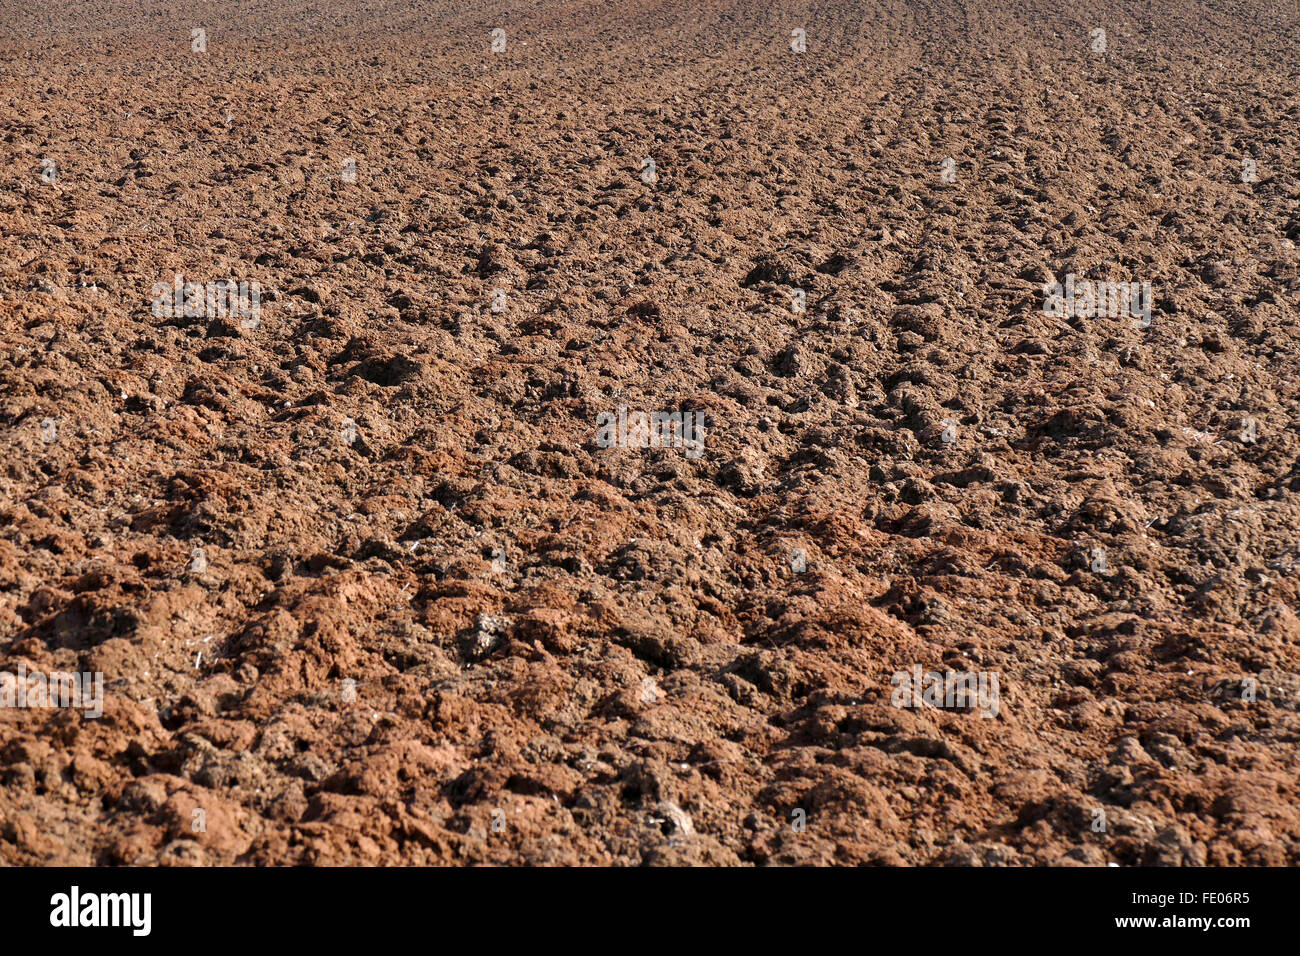 Plowed field before planting. Stock Photo